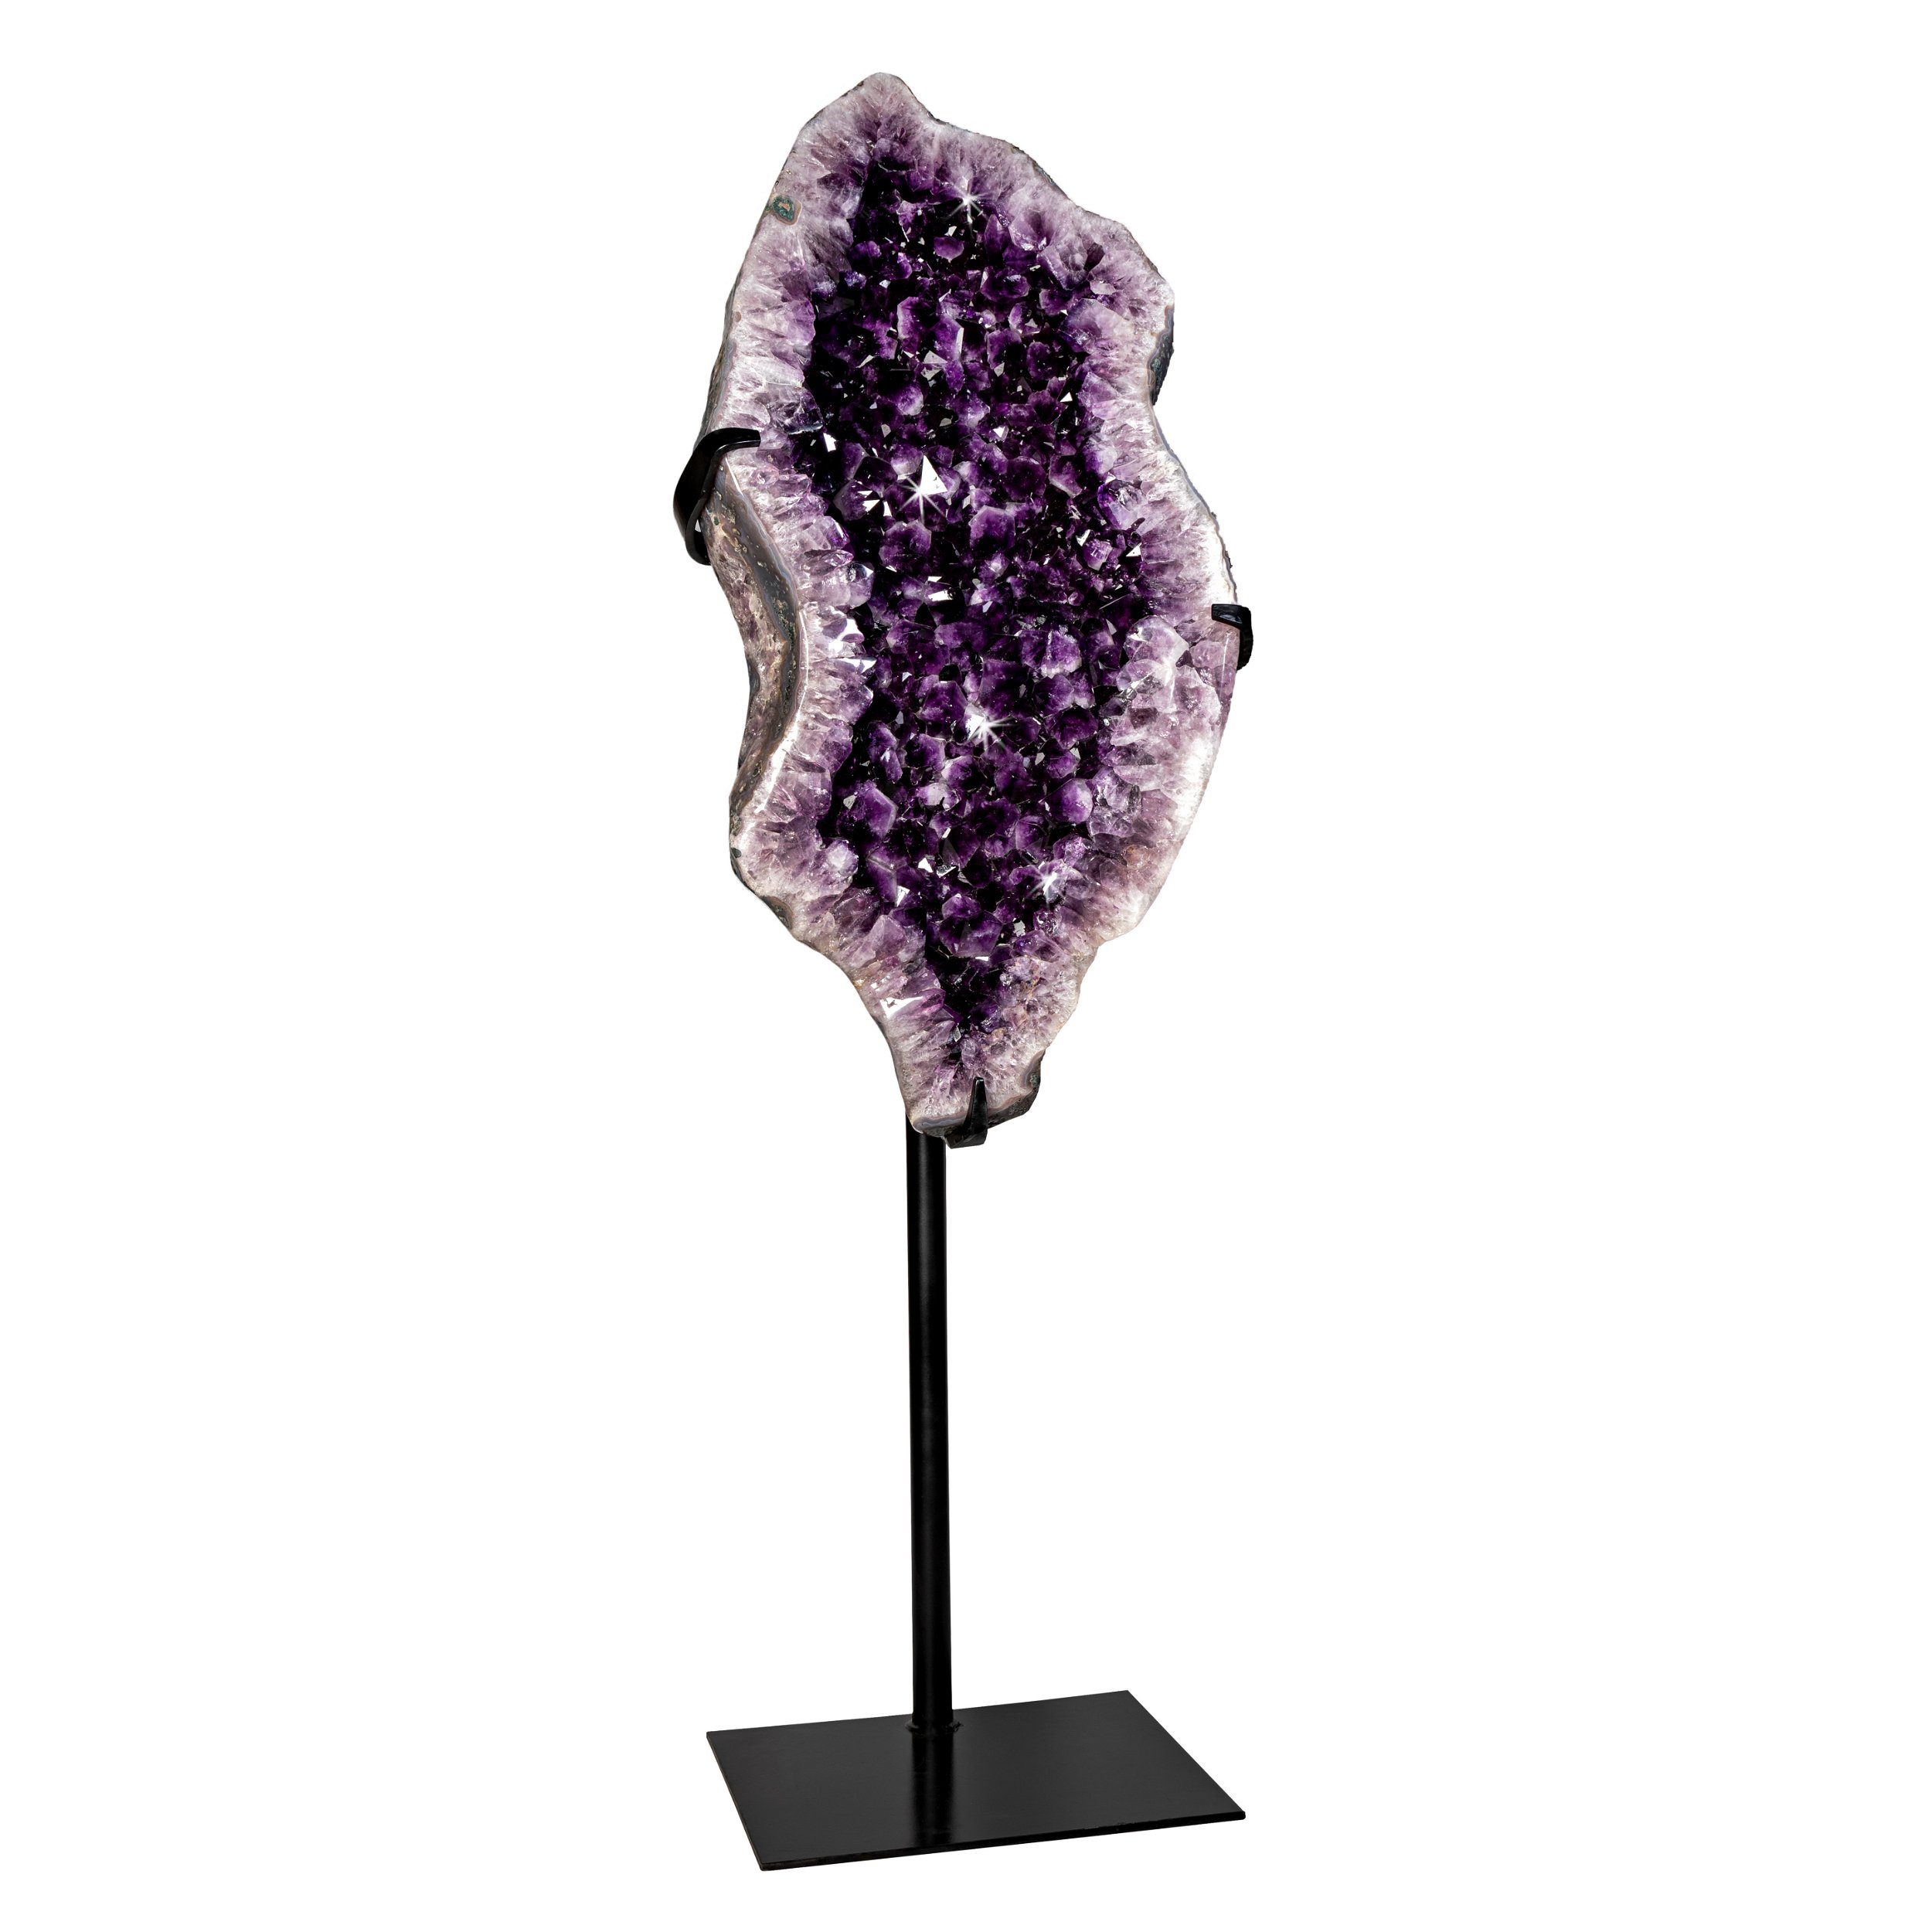 Amethyst Geode With Angular Shape And Large Crystals On Fitted Base